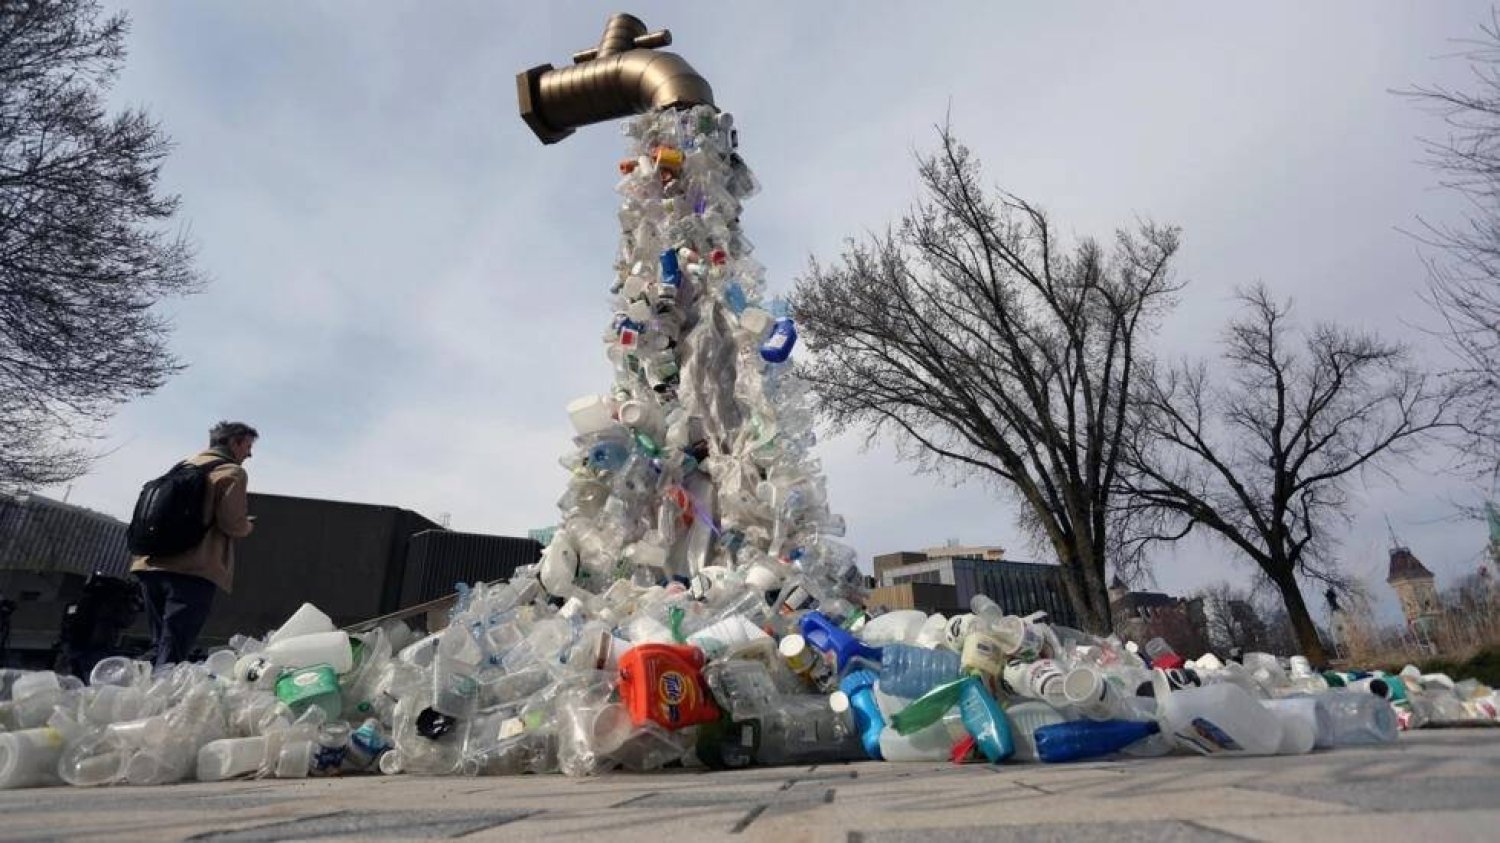 A sculpture titled "Giant Plastic Tap" by Canadian artist Benjamin Von Wong is displayed outside the fourth session of the UN Intergovernmental Negotiating Committee on Plastic Pollution that has wrapped up in Ottawa, Canada. Dave Chan / AFP